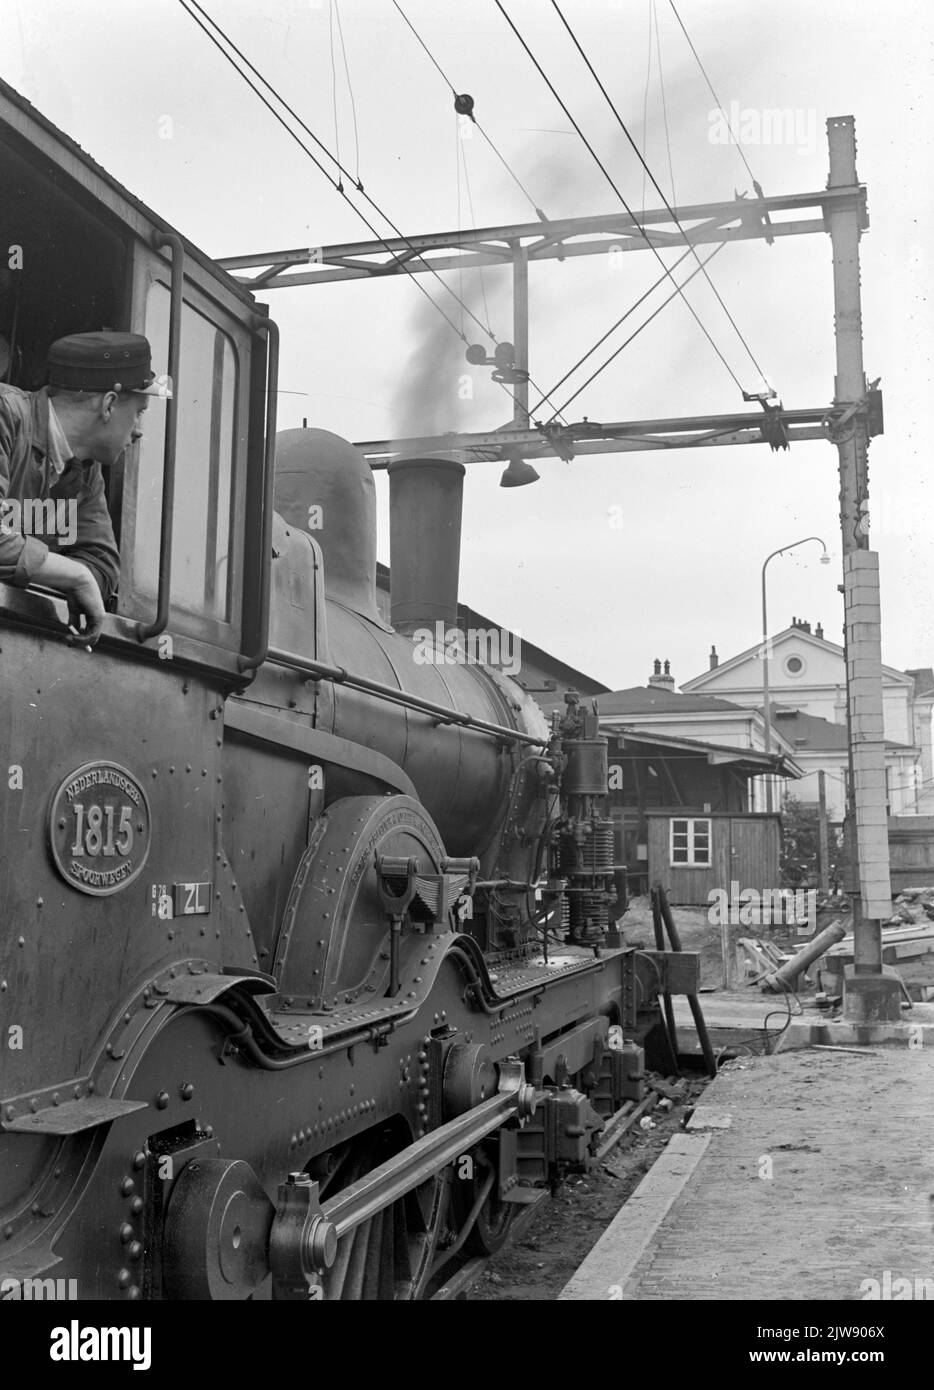 Image of a part of the steam locomotive No. 1815 (series 1700/1800) of the N.S. Along the platform of the N.S. station Zwolle in Zwolle. Stock Photo